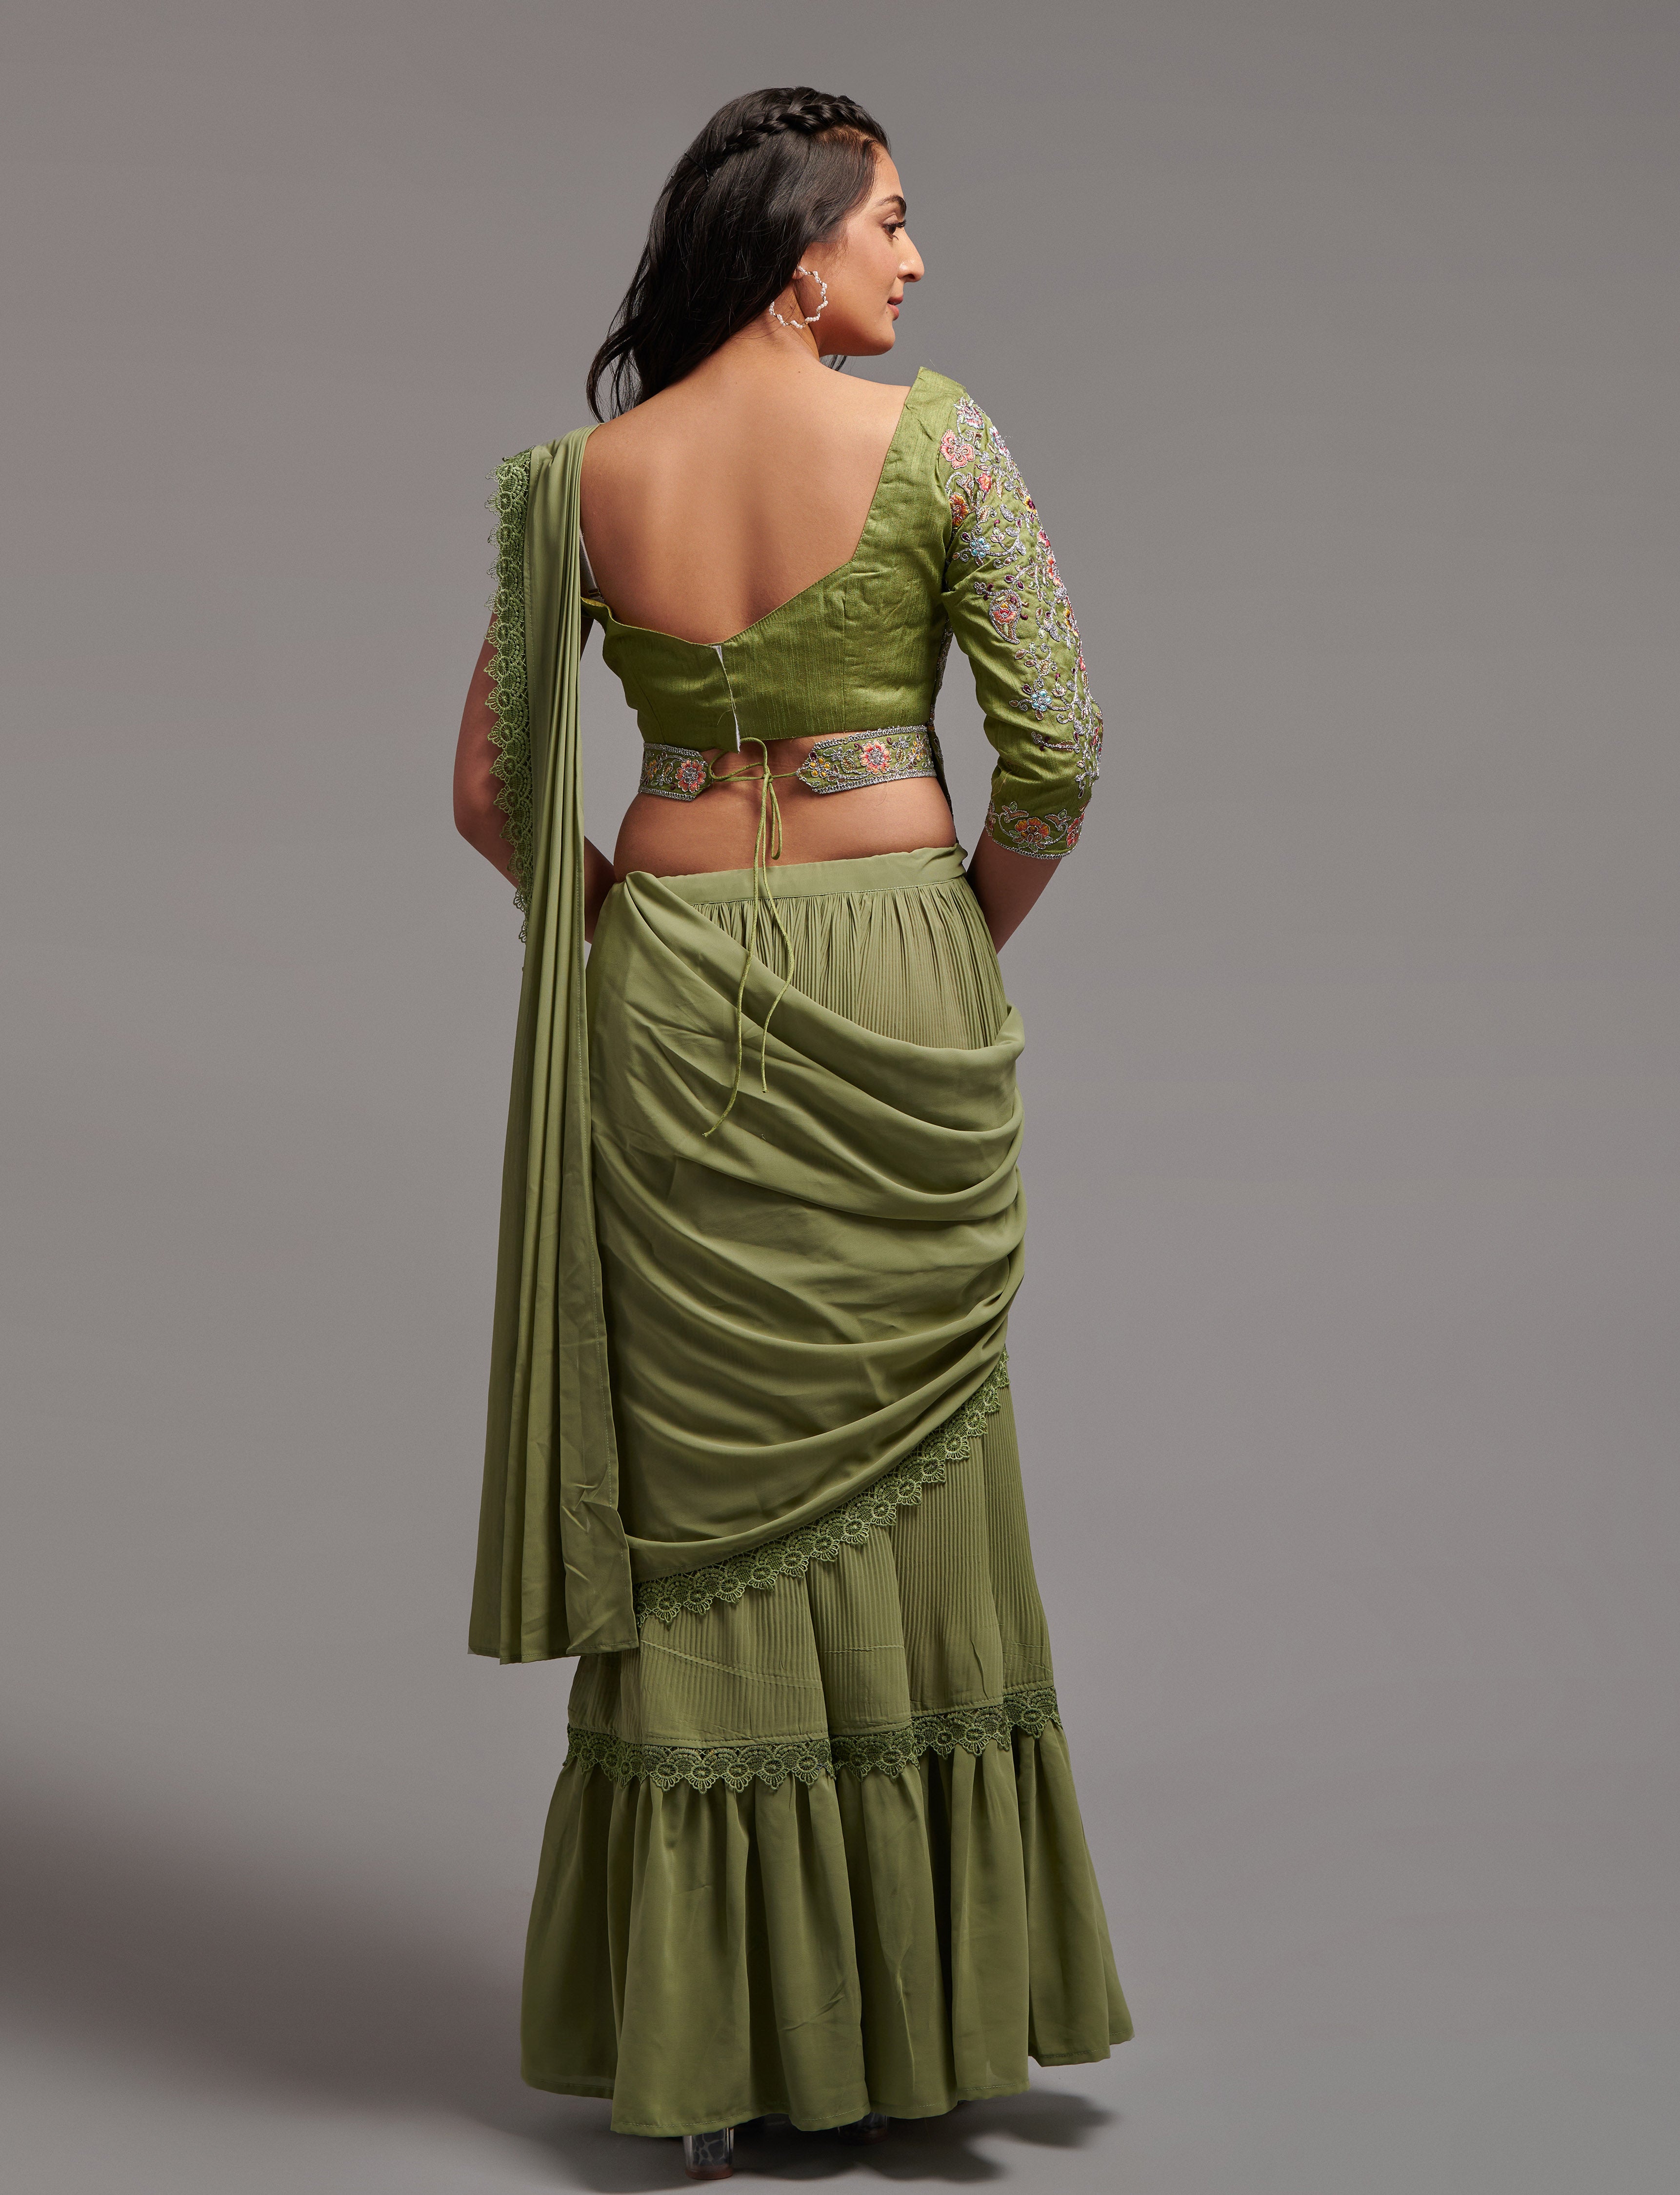 Women Wedding Wear Ready to Wear Goergette Saree with Stitched Blouse(Free Size-Up to 42)